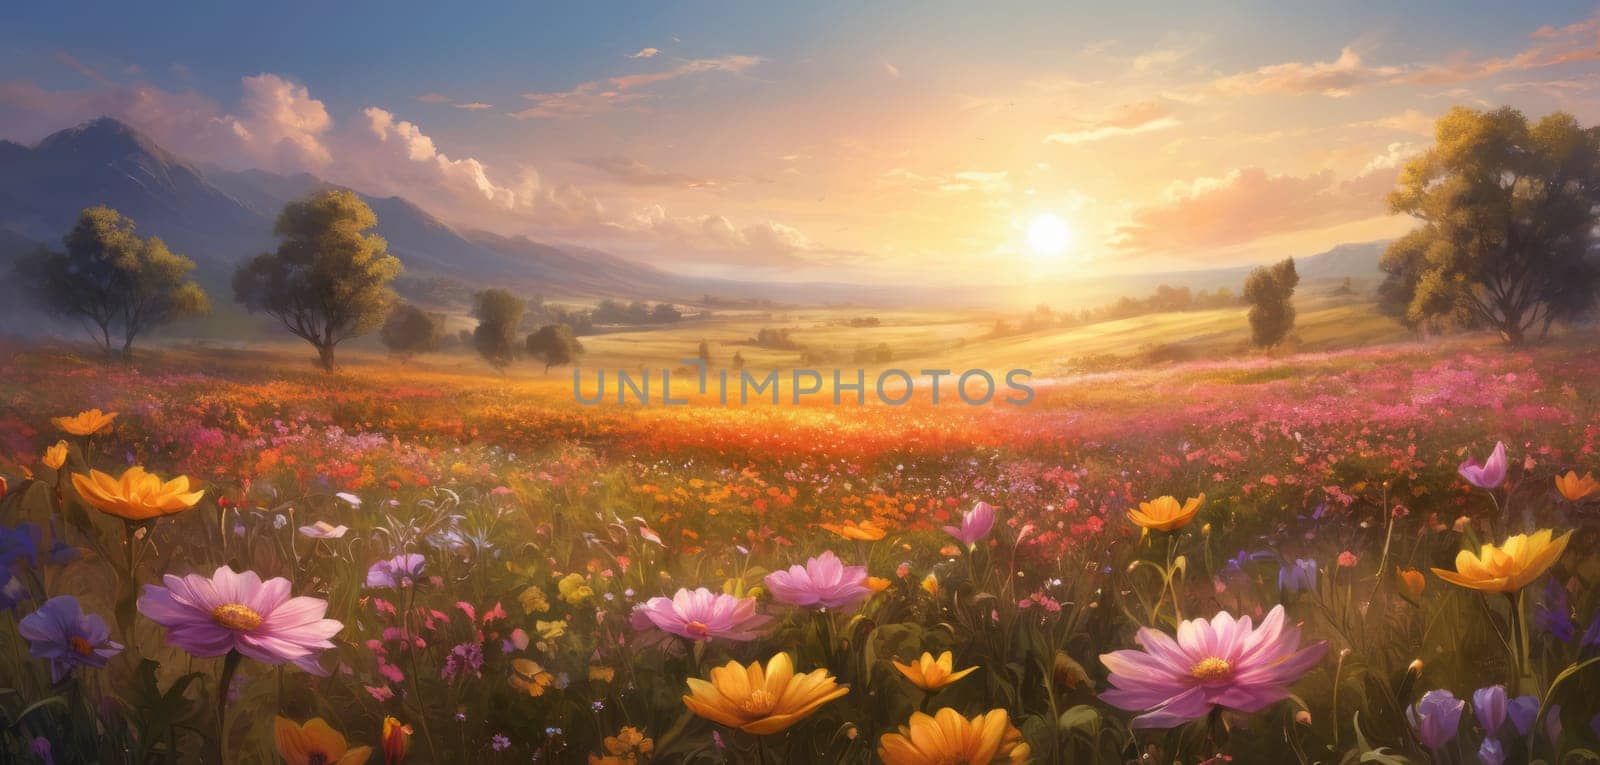 A breathtaking sunrise illuminating a vibrant meadow teeming with colorful blossoms. The serene landscape exudes warmth and tranquility as light rays dance over the flowers. A picturesque scene capturing nature s awakening